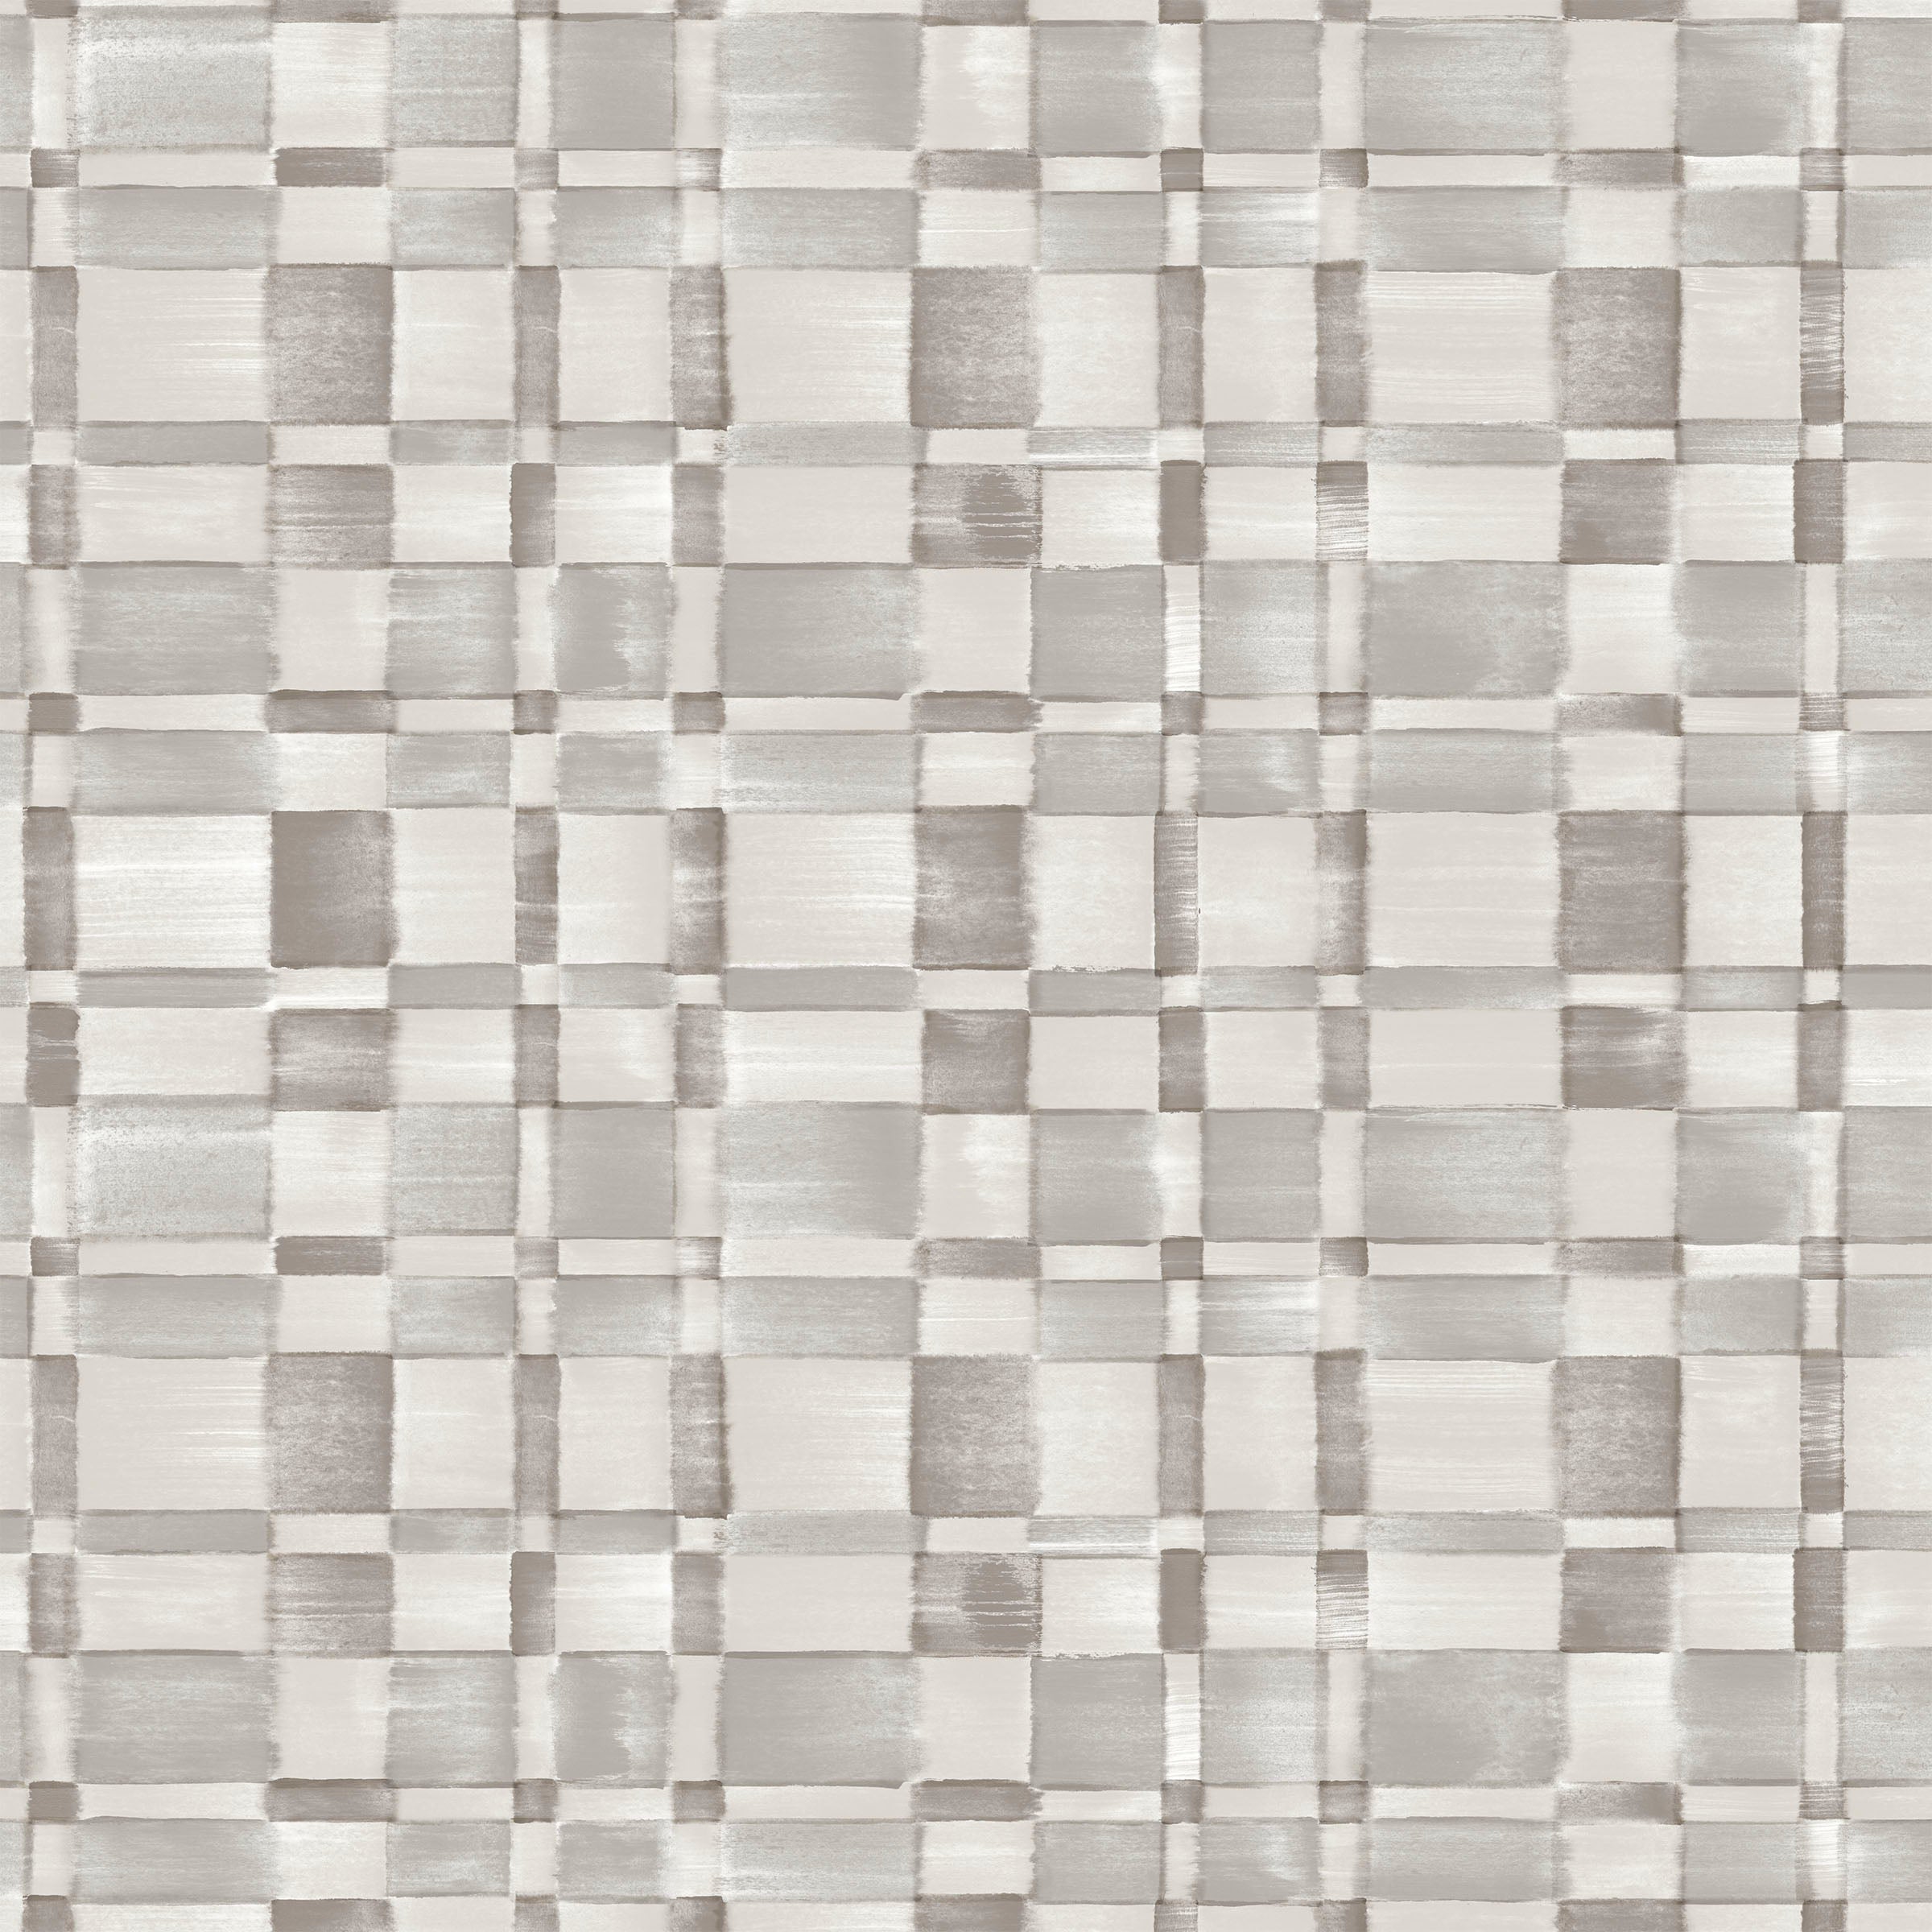 Detail of fabric in a large-scale checked pattern in shades of greige.